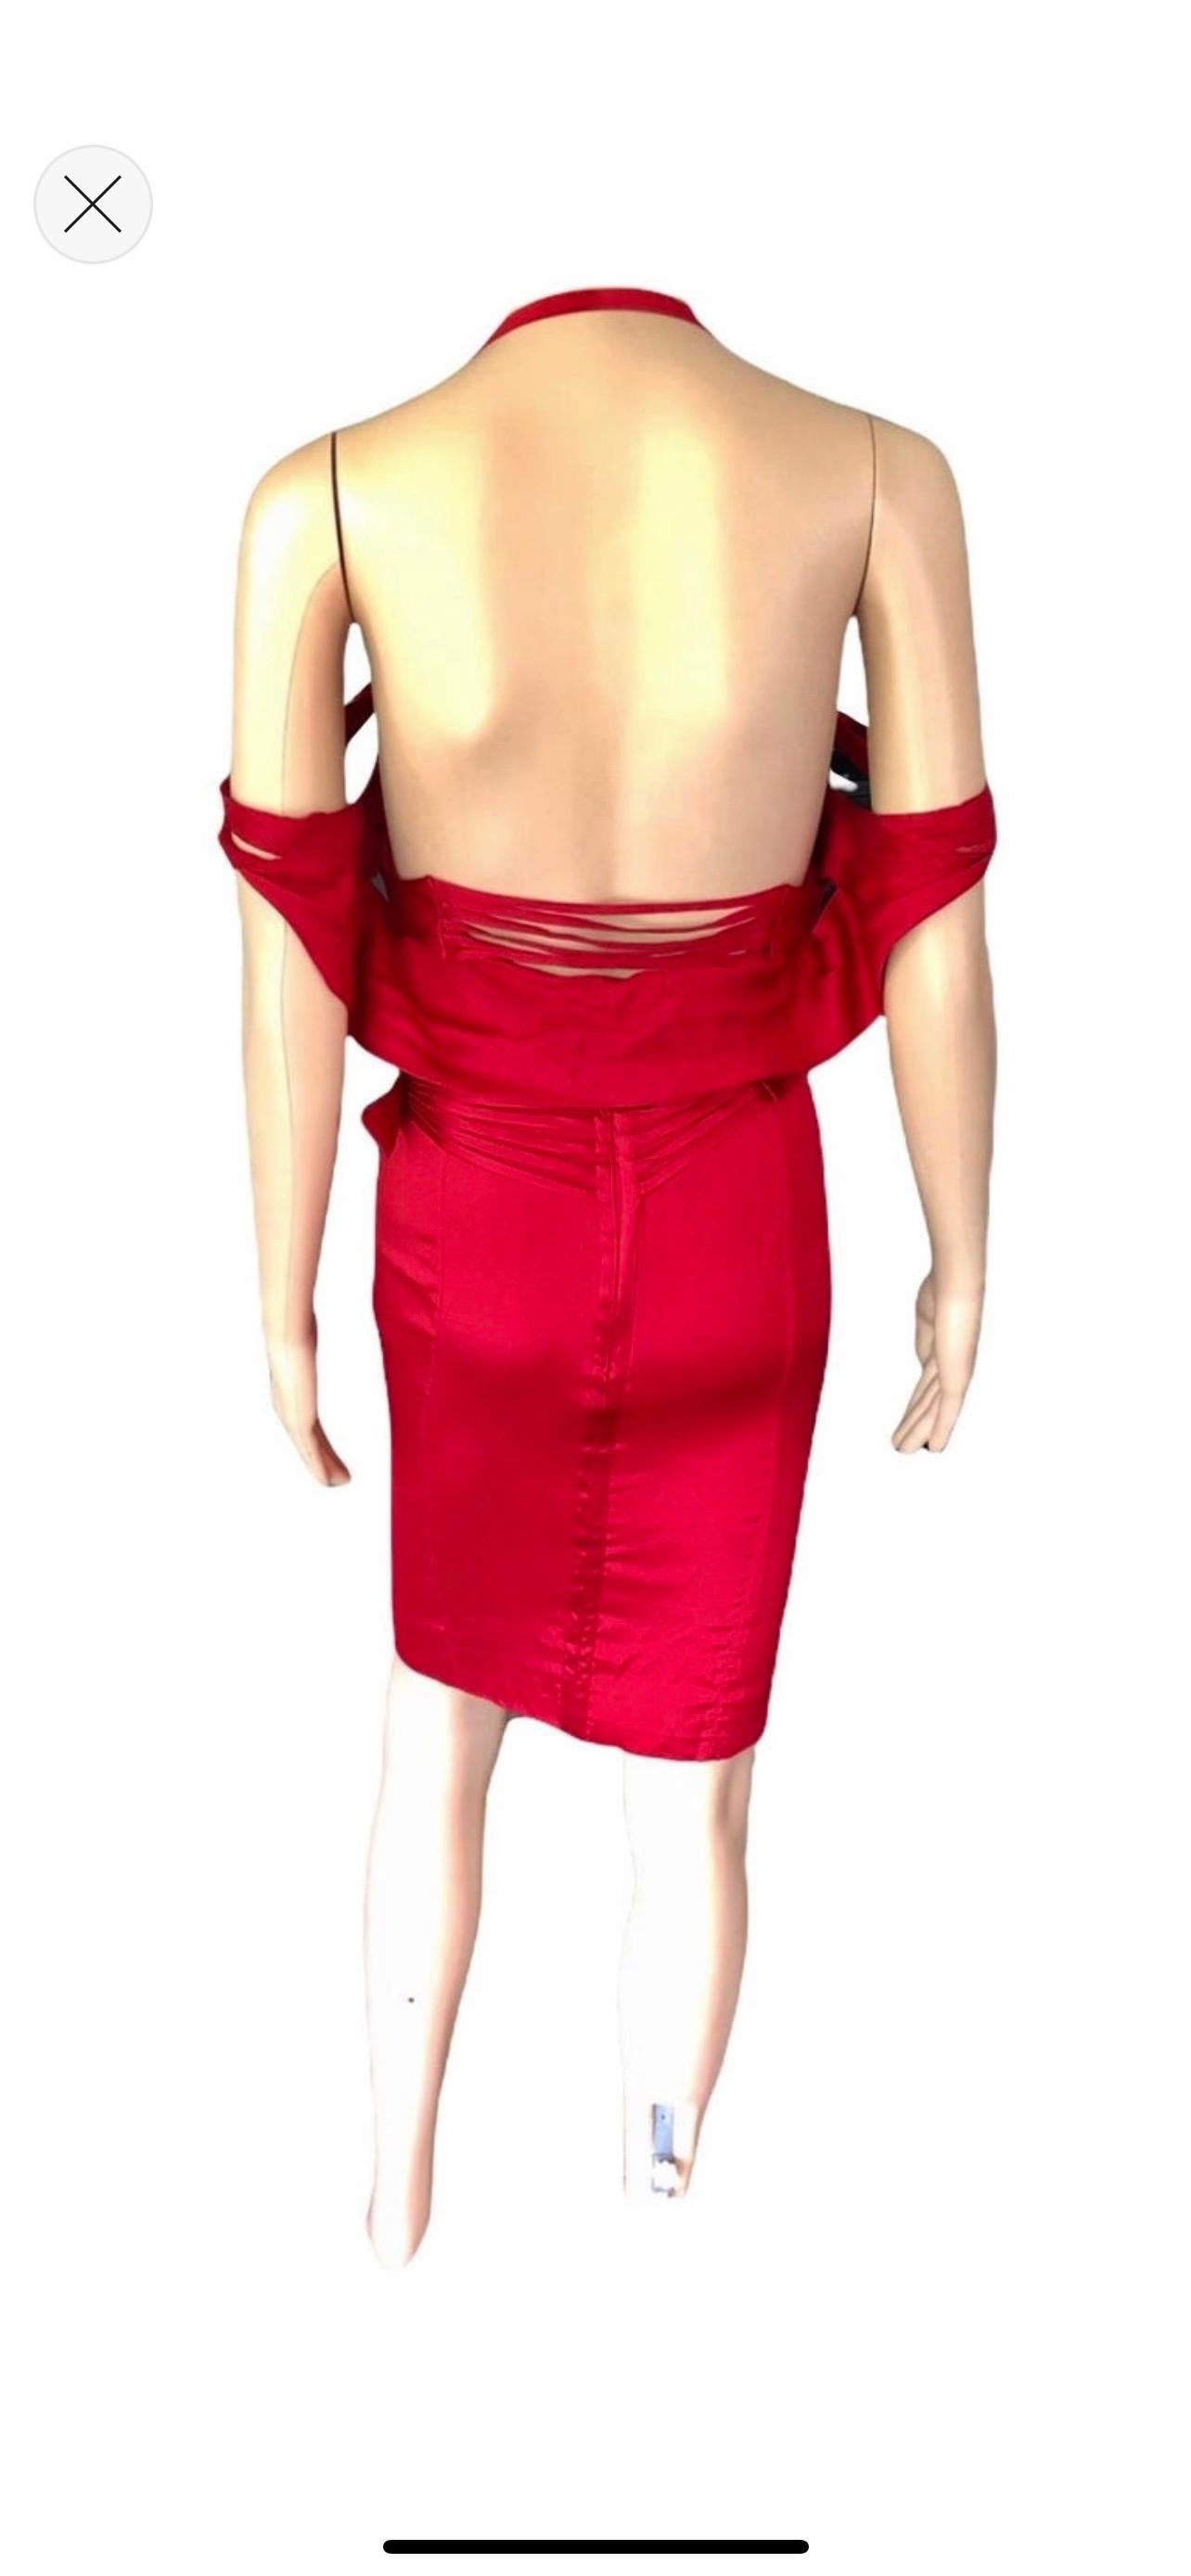 Tom Ford for Gucci F/W 2003 Runway Bustier Corset Silk Red Dress In Good Condition For Sale In Naples, FL